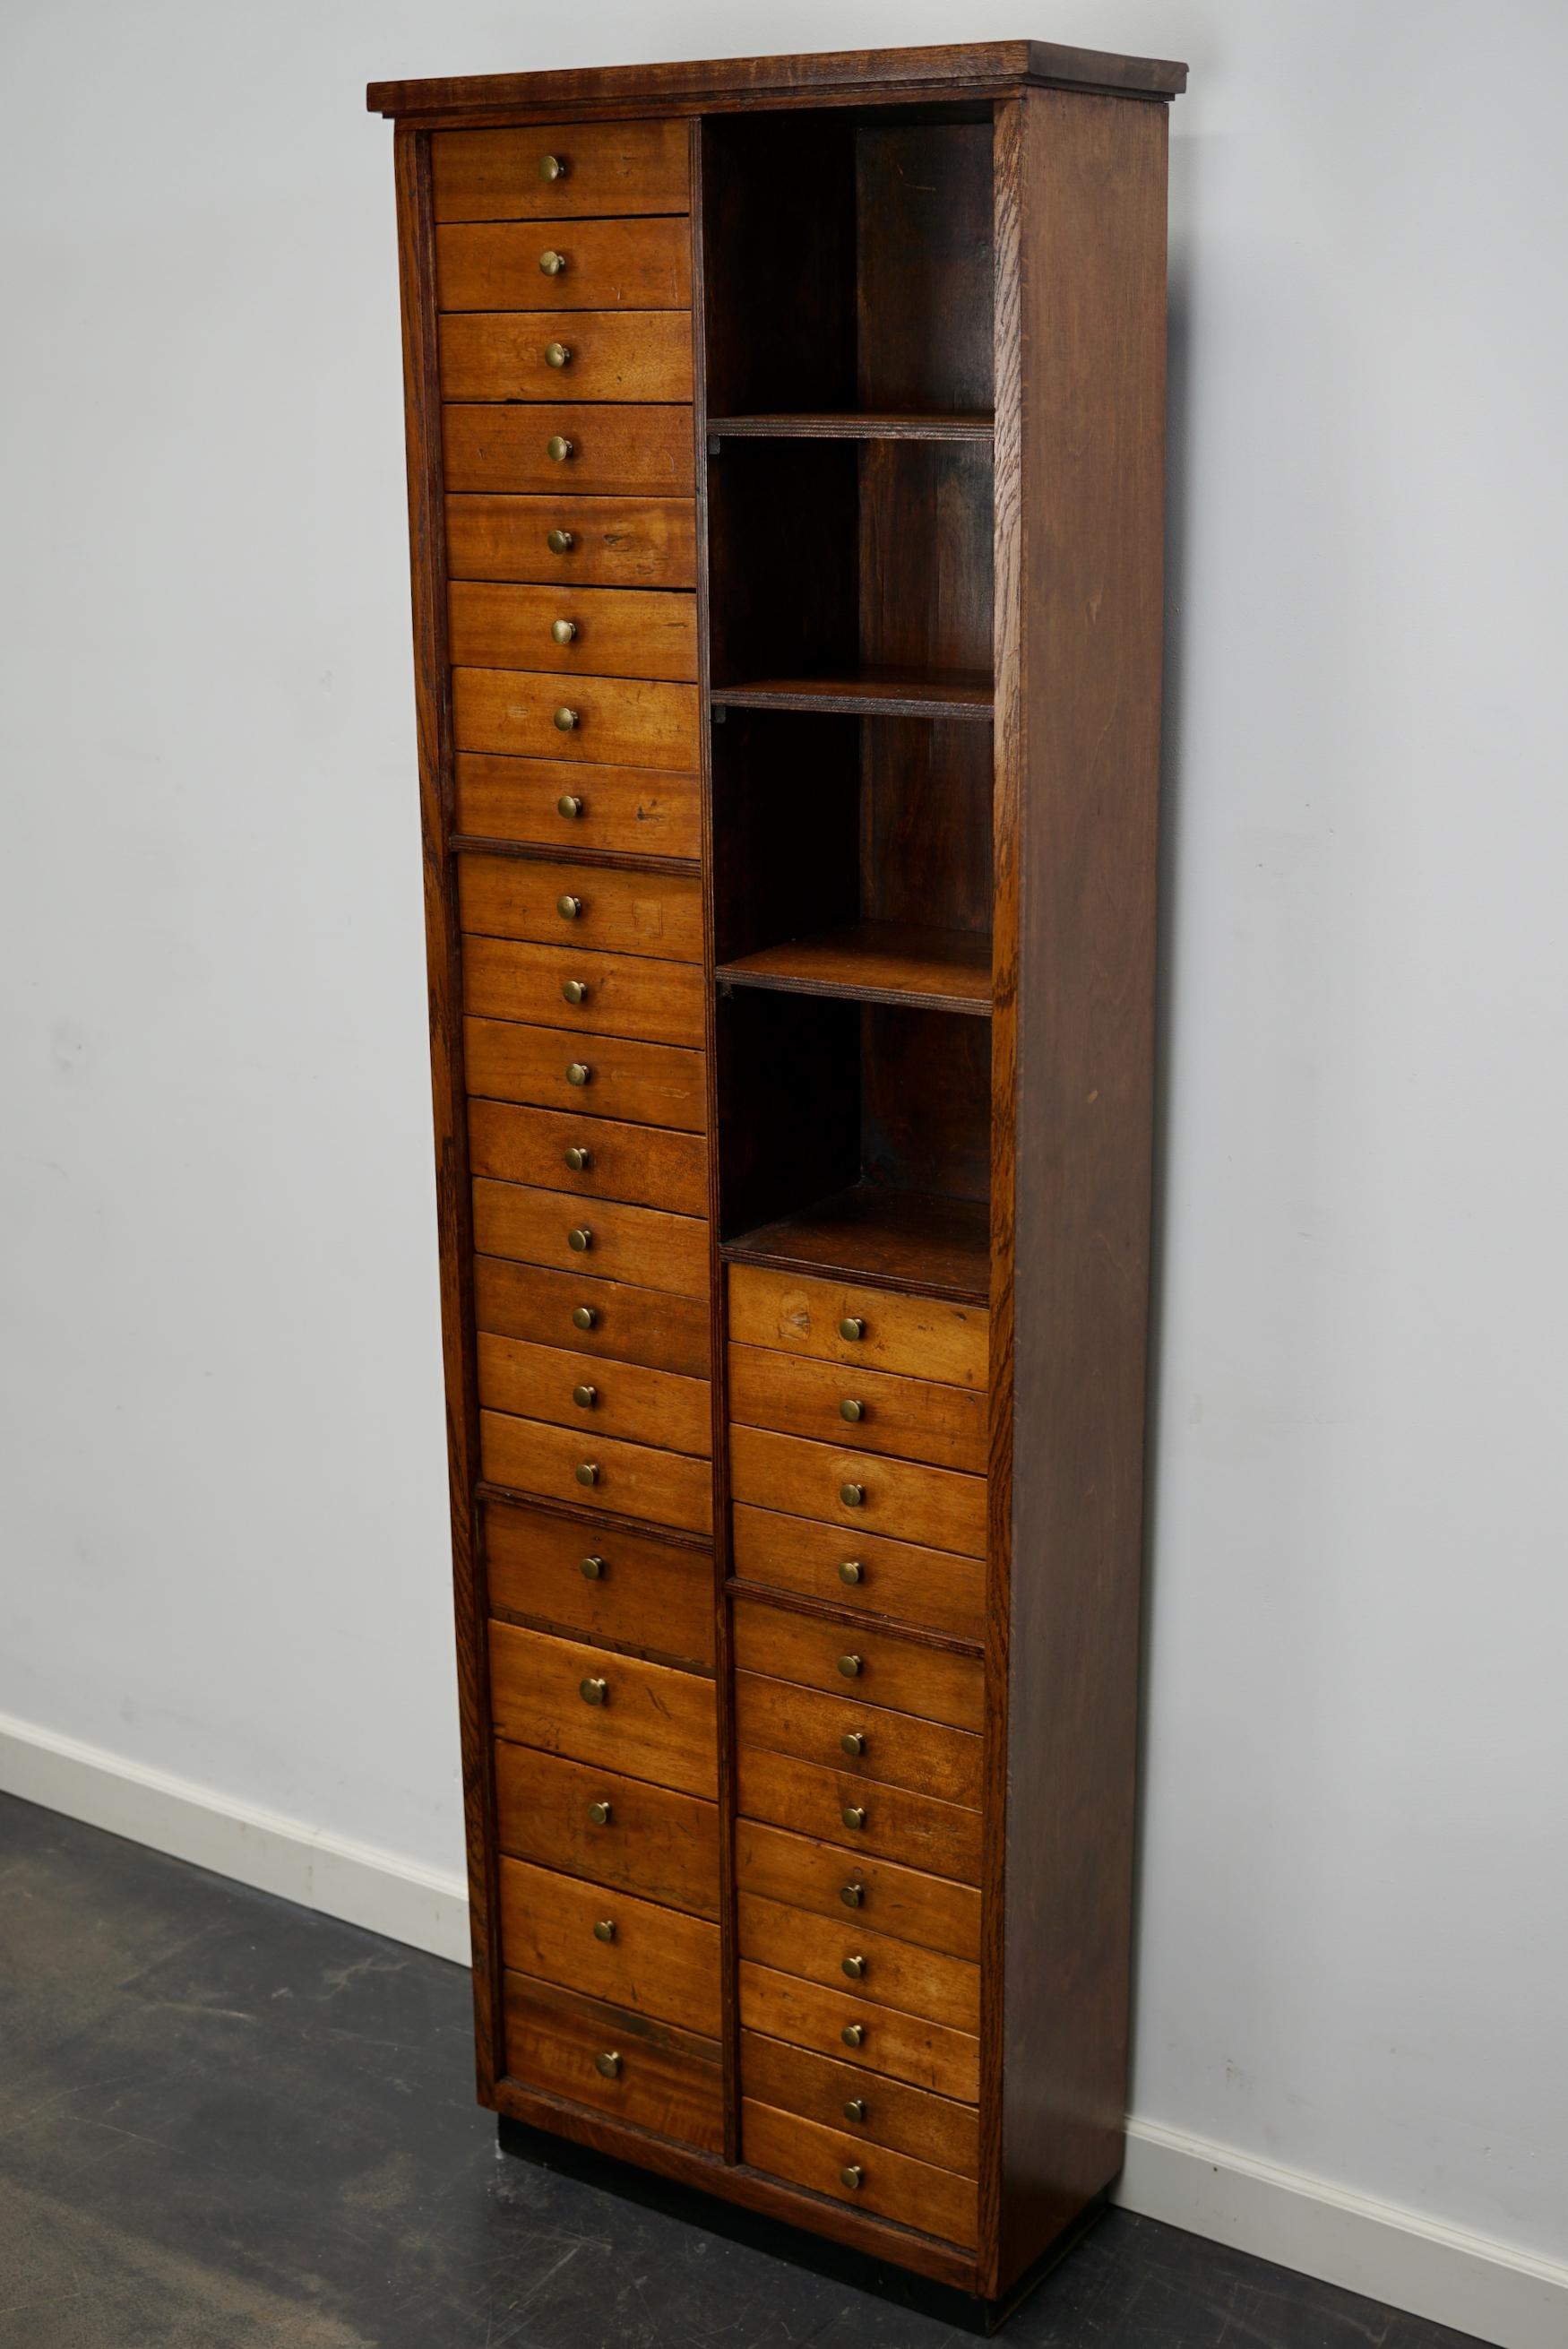 This beech cabinet with brass hardware was made in the mid 20th century in France and was used by a watchmaker. It is very well made and it remains in a good restored condition. The interior dimensions of the drawers are: D W H 14 x 17 x 4 & 8 cm.